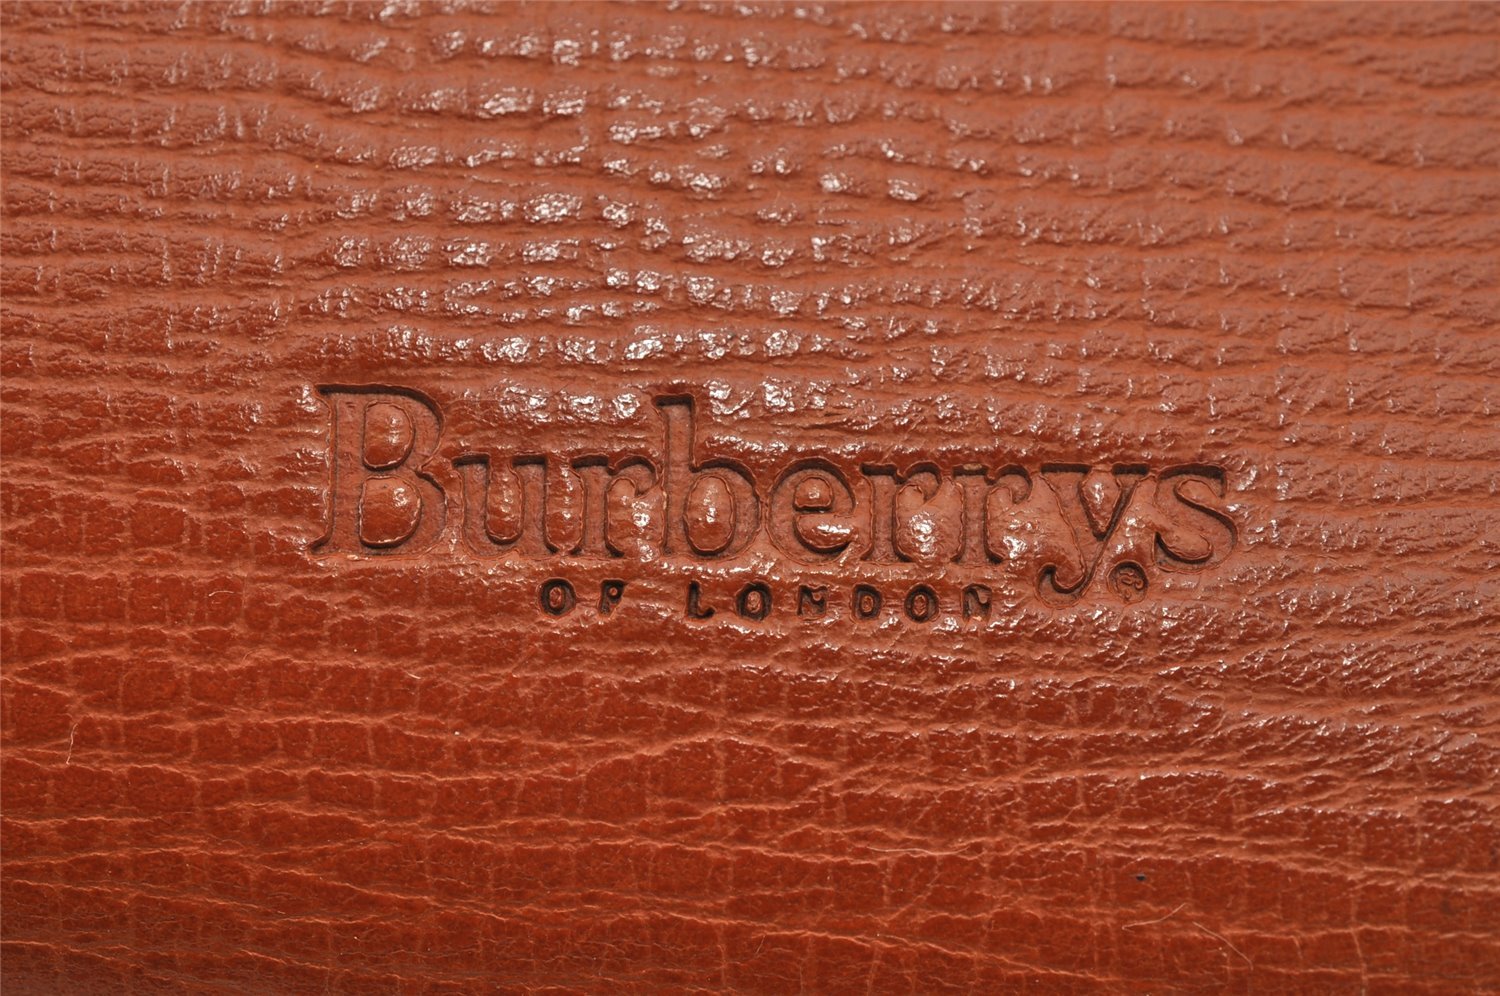 Authentic Burberrys Vintage Leather Clutch Hand Bag Purse Brown 2431I